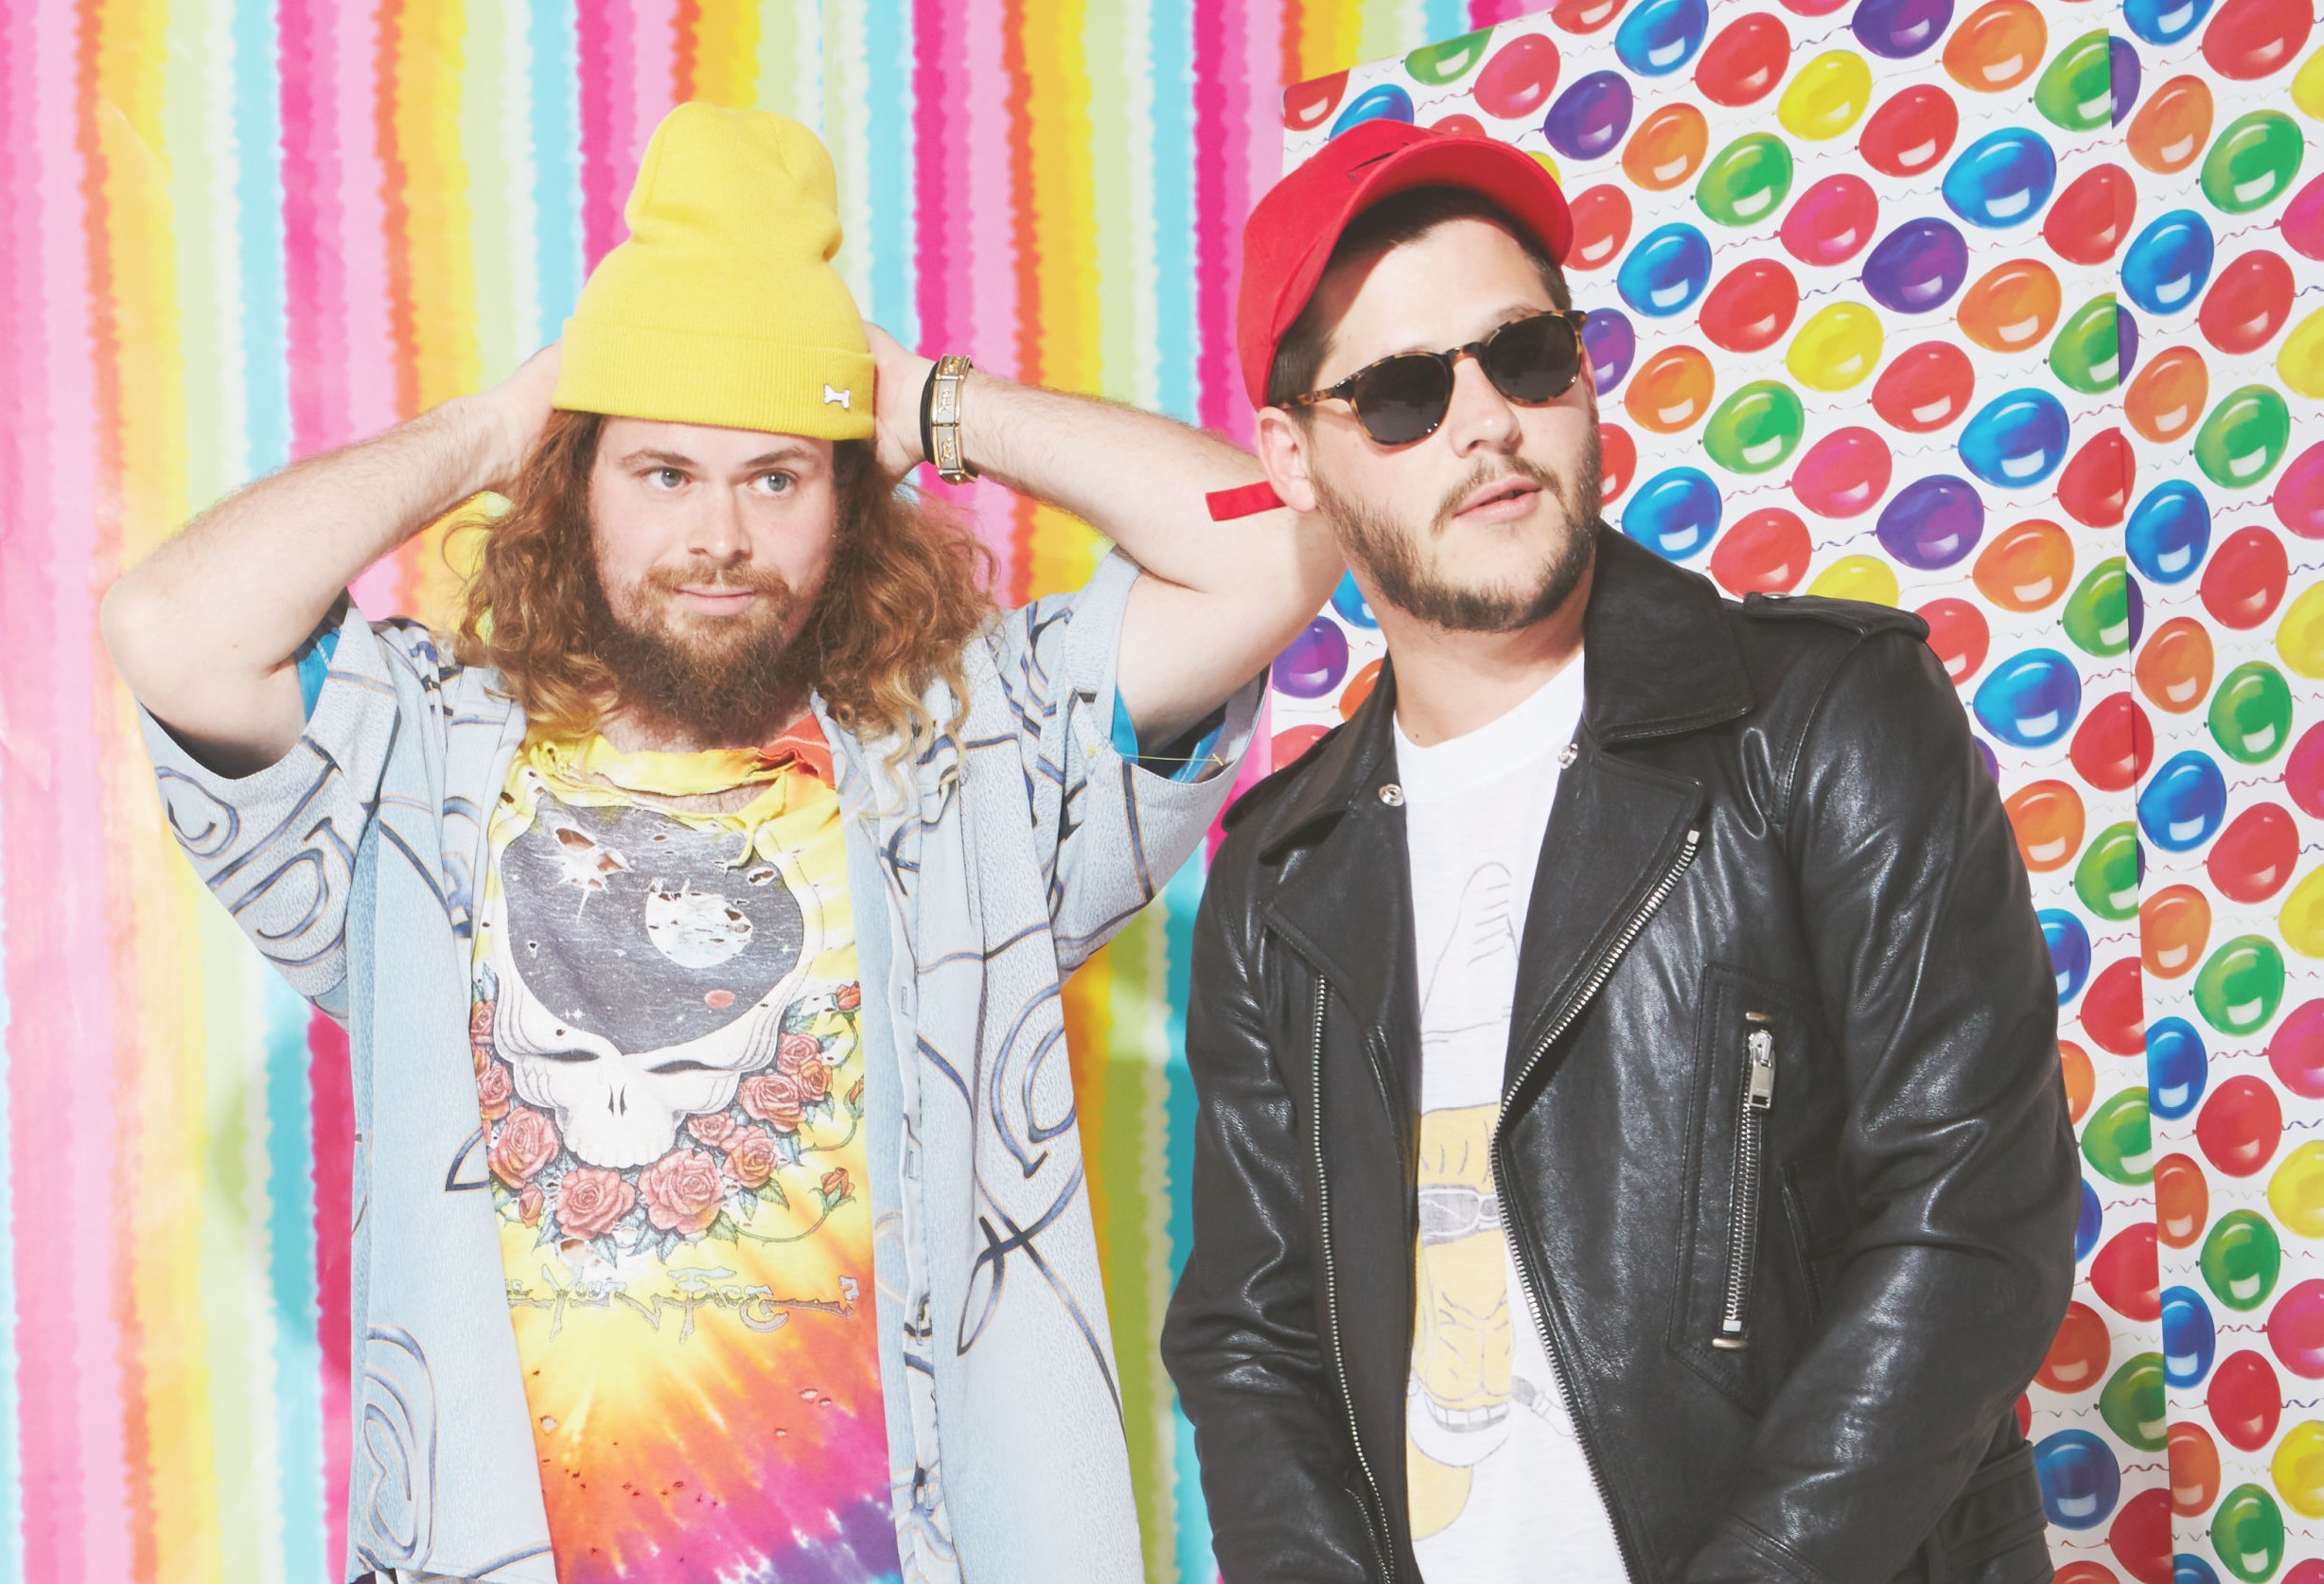 Wavves' Stephen 'Stevie' Pope (left) and Nathan Williams (right) // credit: Alexandra Gavillet